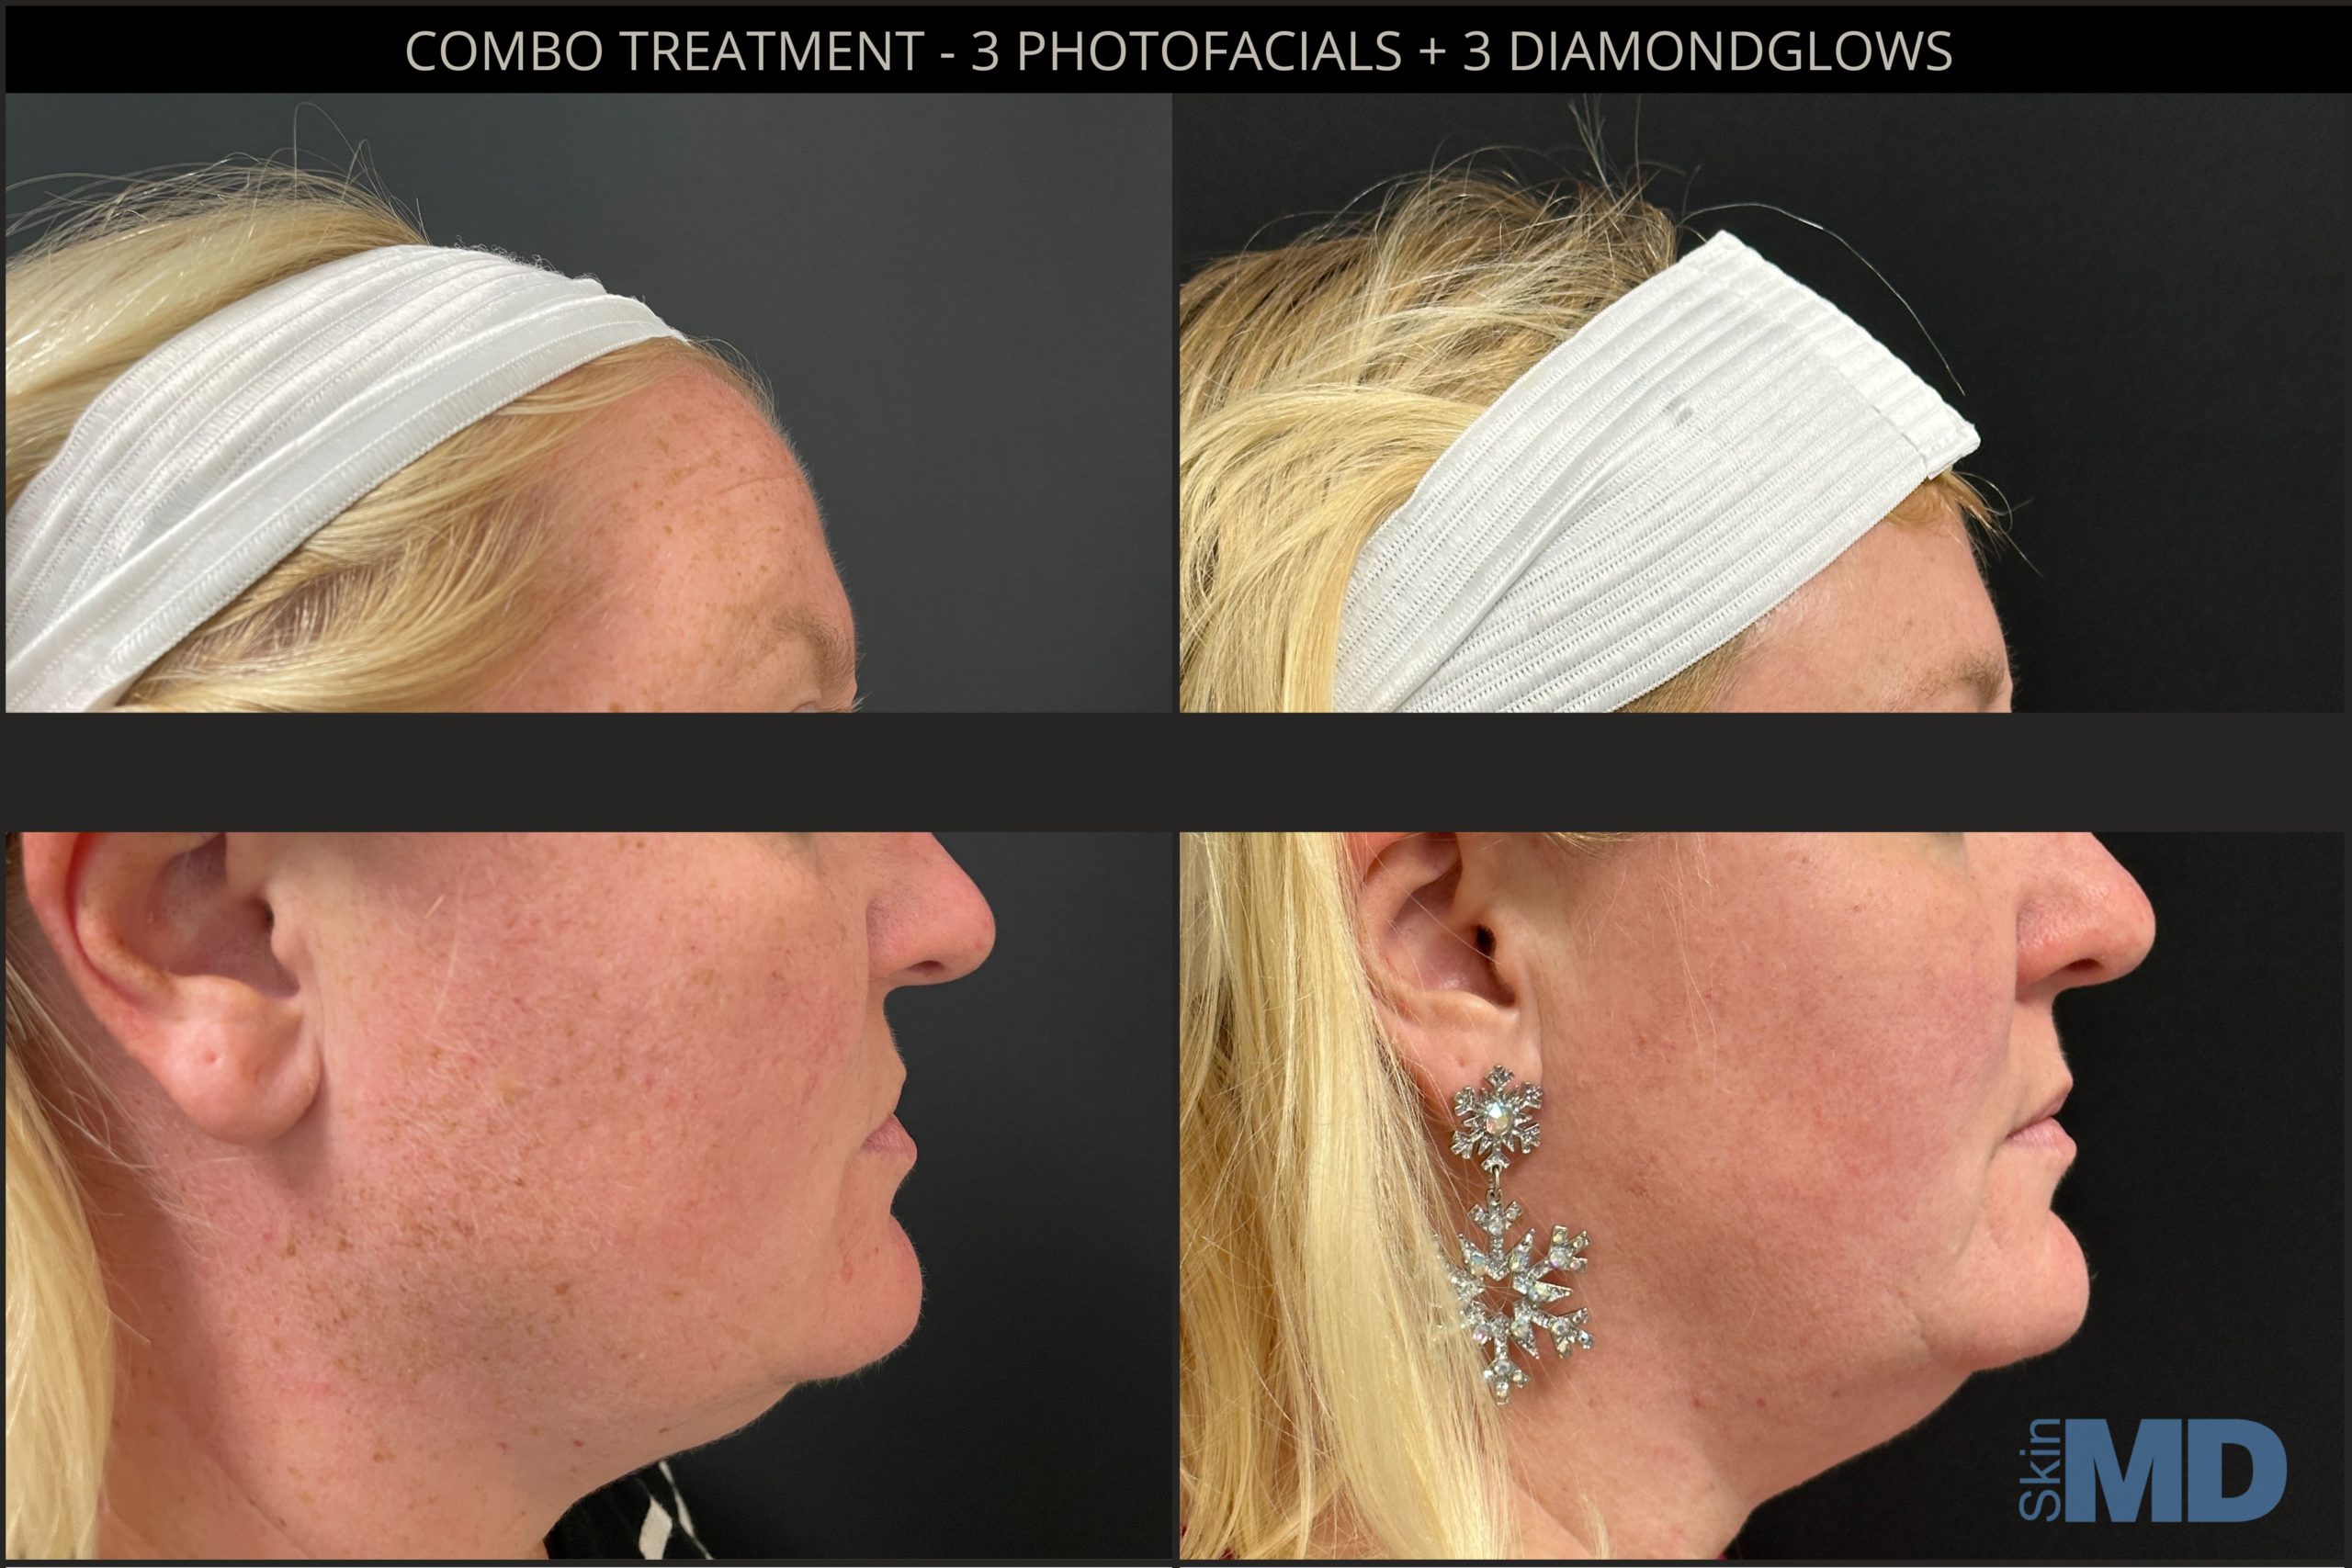 Before and after Combo treatment results